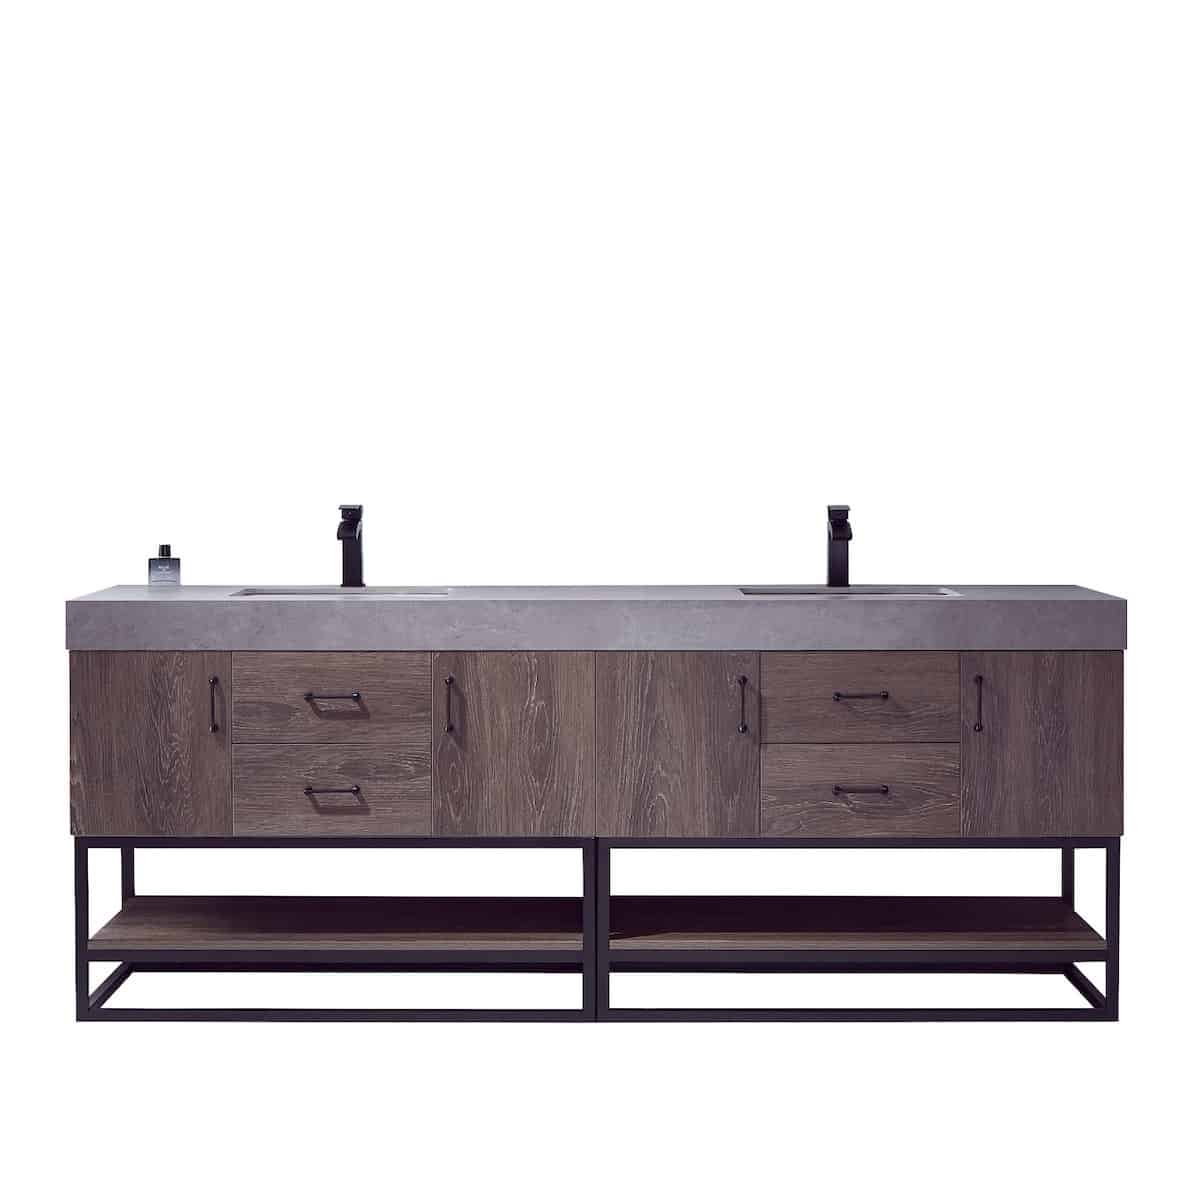 Vinnova Alistair 84 Inch Freestanding Double Sink Bath Vanity in North Carolina Oak and Matte Black Frame with Grey Sintered Stone Top Without Mirrors 789084B-NC-WK-NM